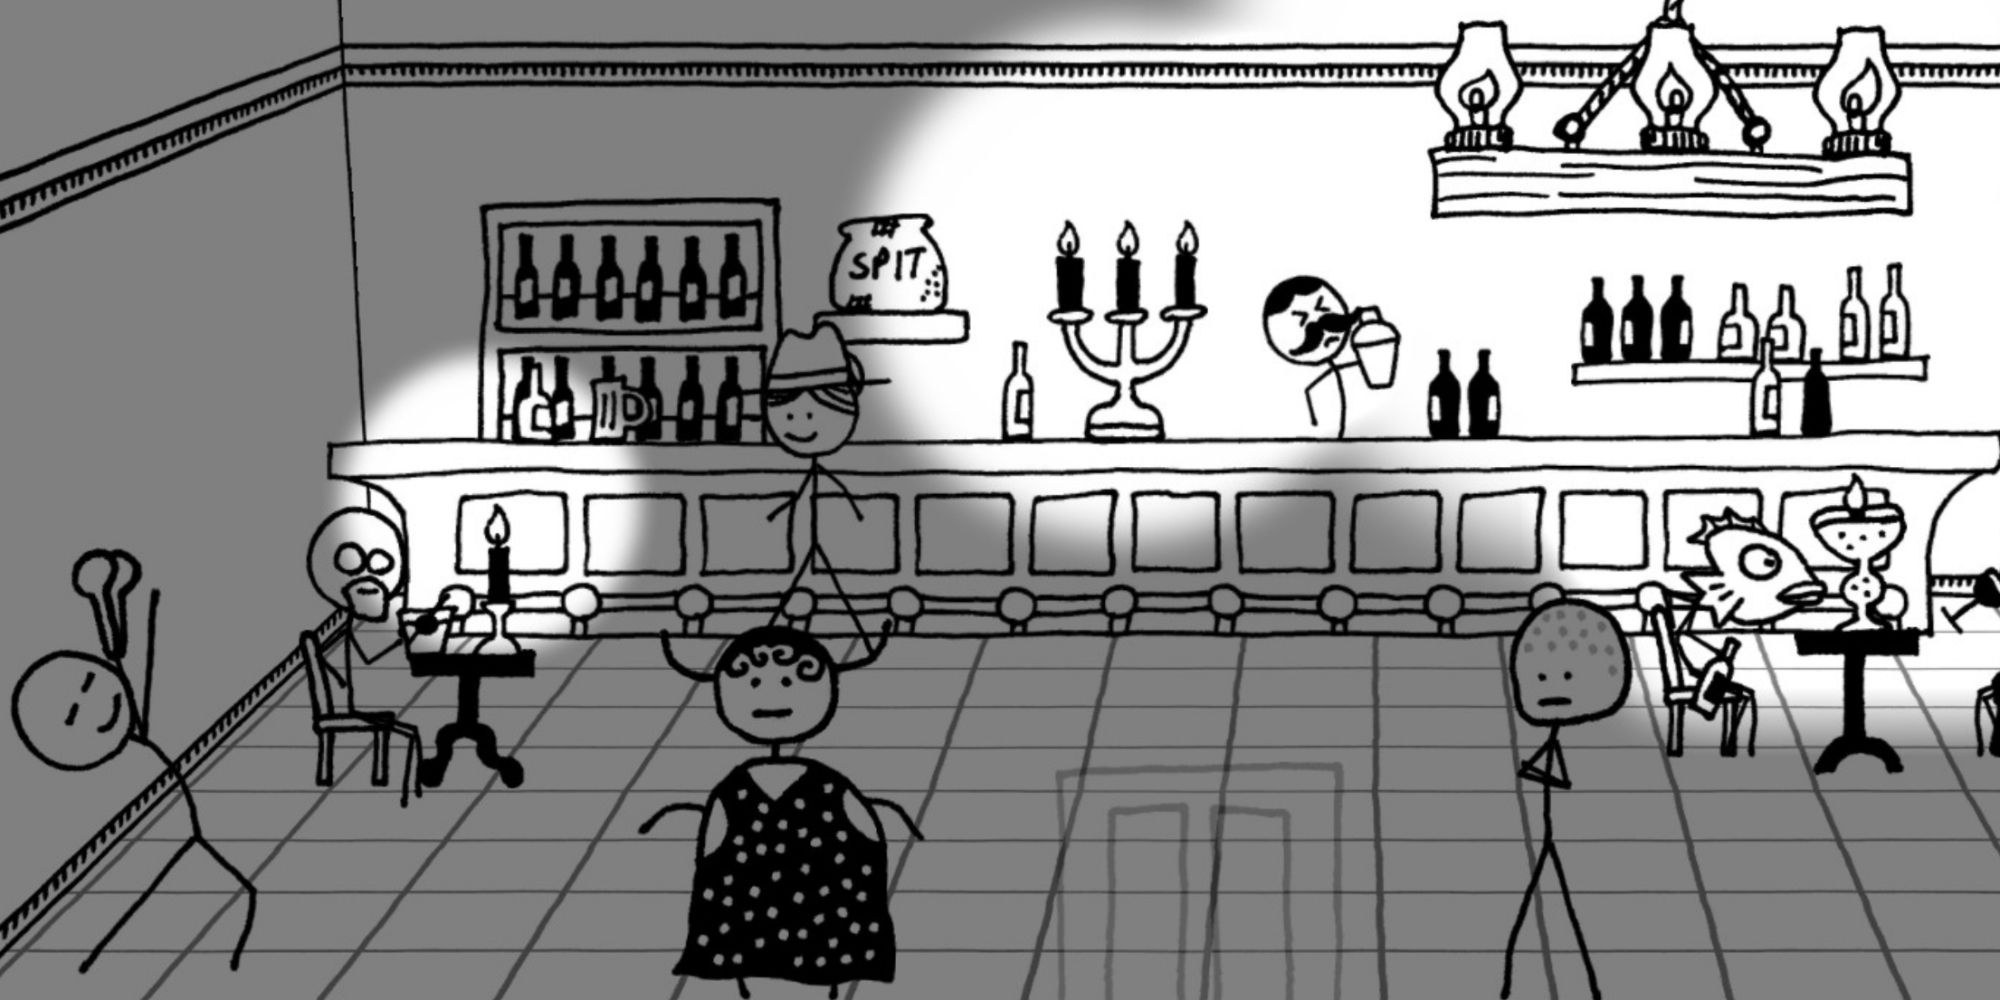 A scene inside a speakeasy in Shadows Over Loathing, showing various characters sitting and standing.